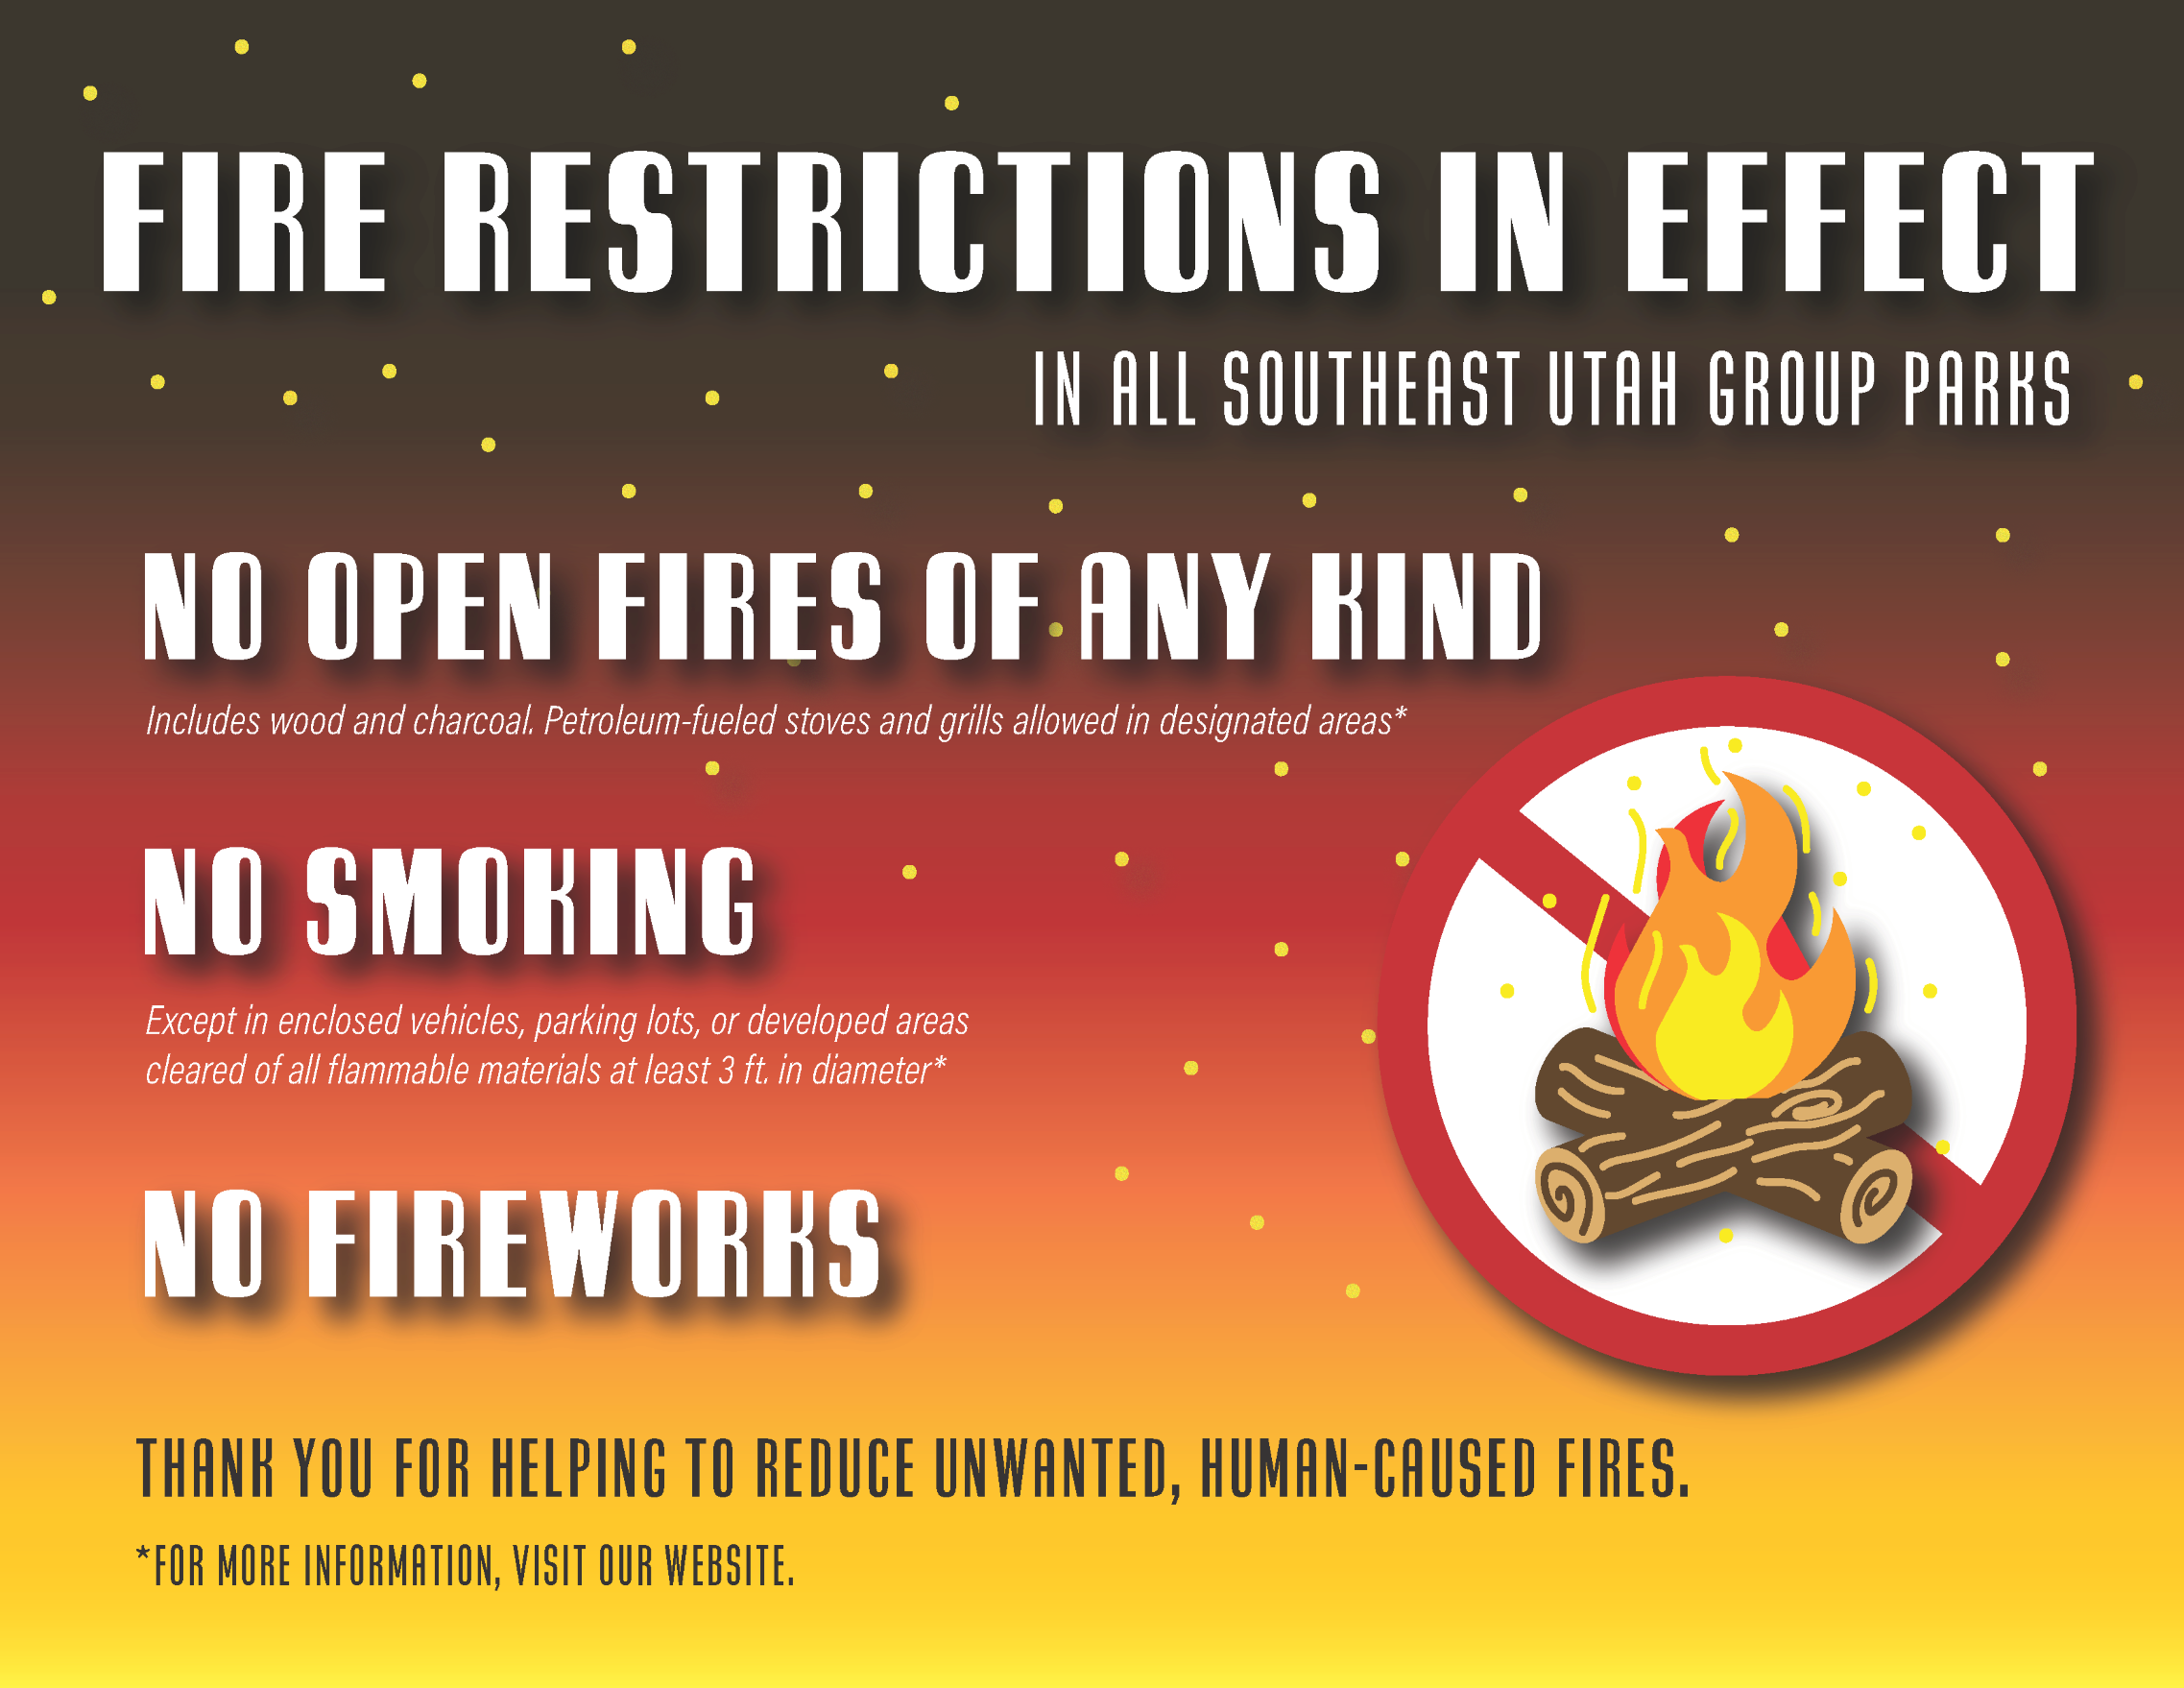 Black, red, orange, and yellow graphic features a prohibited campfire icon with embers. White and black text highlights current fire restrictions: no open fires of any kind, no smoking, and no fireworks. More information available on park websites.